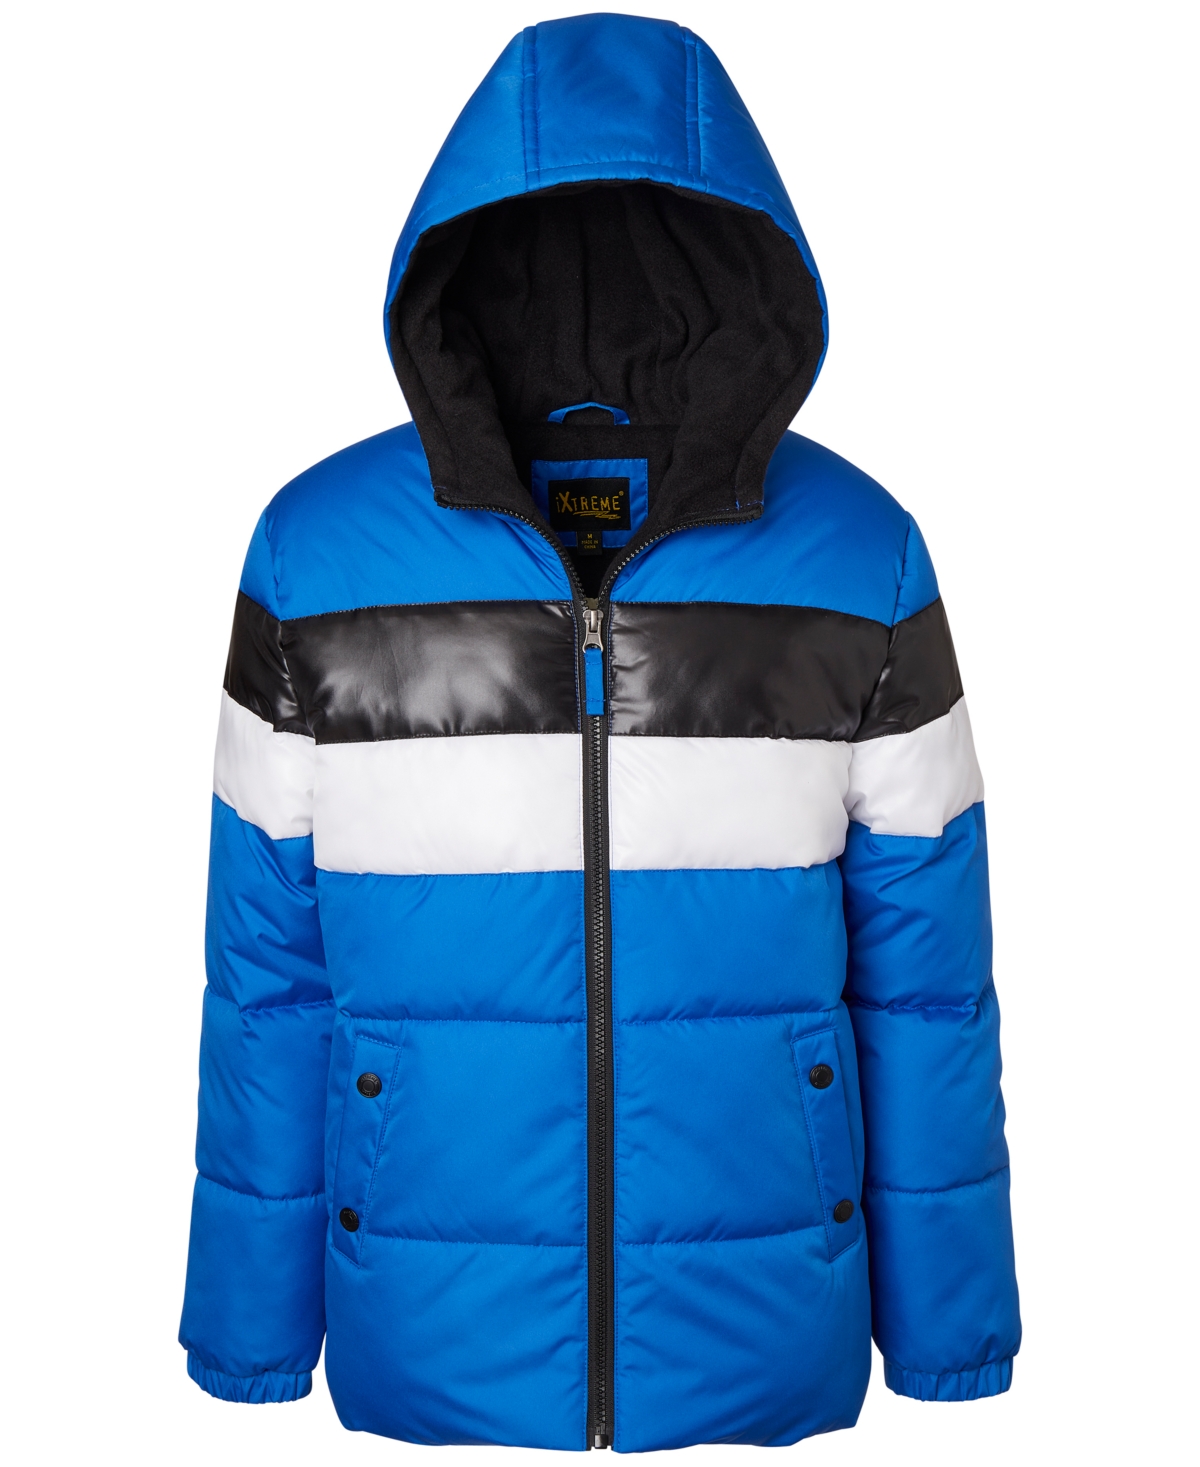 Wippette Ixtreme Toddler & Little Boys Colorblocked Hooded Puffer Jacket In Royal